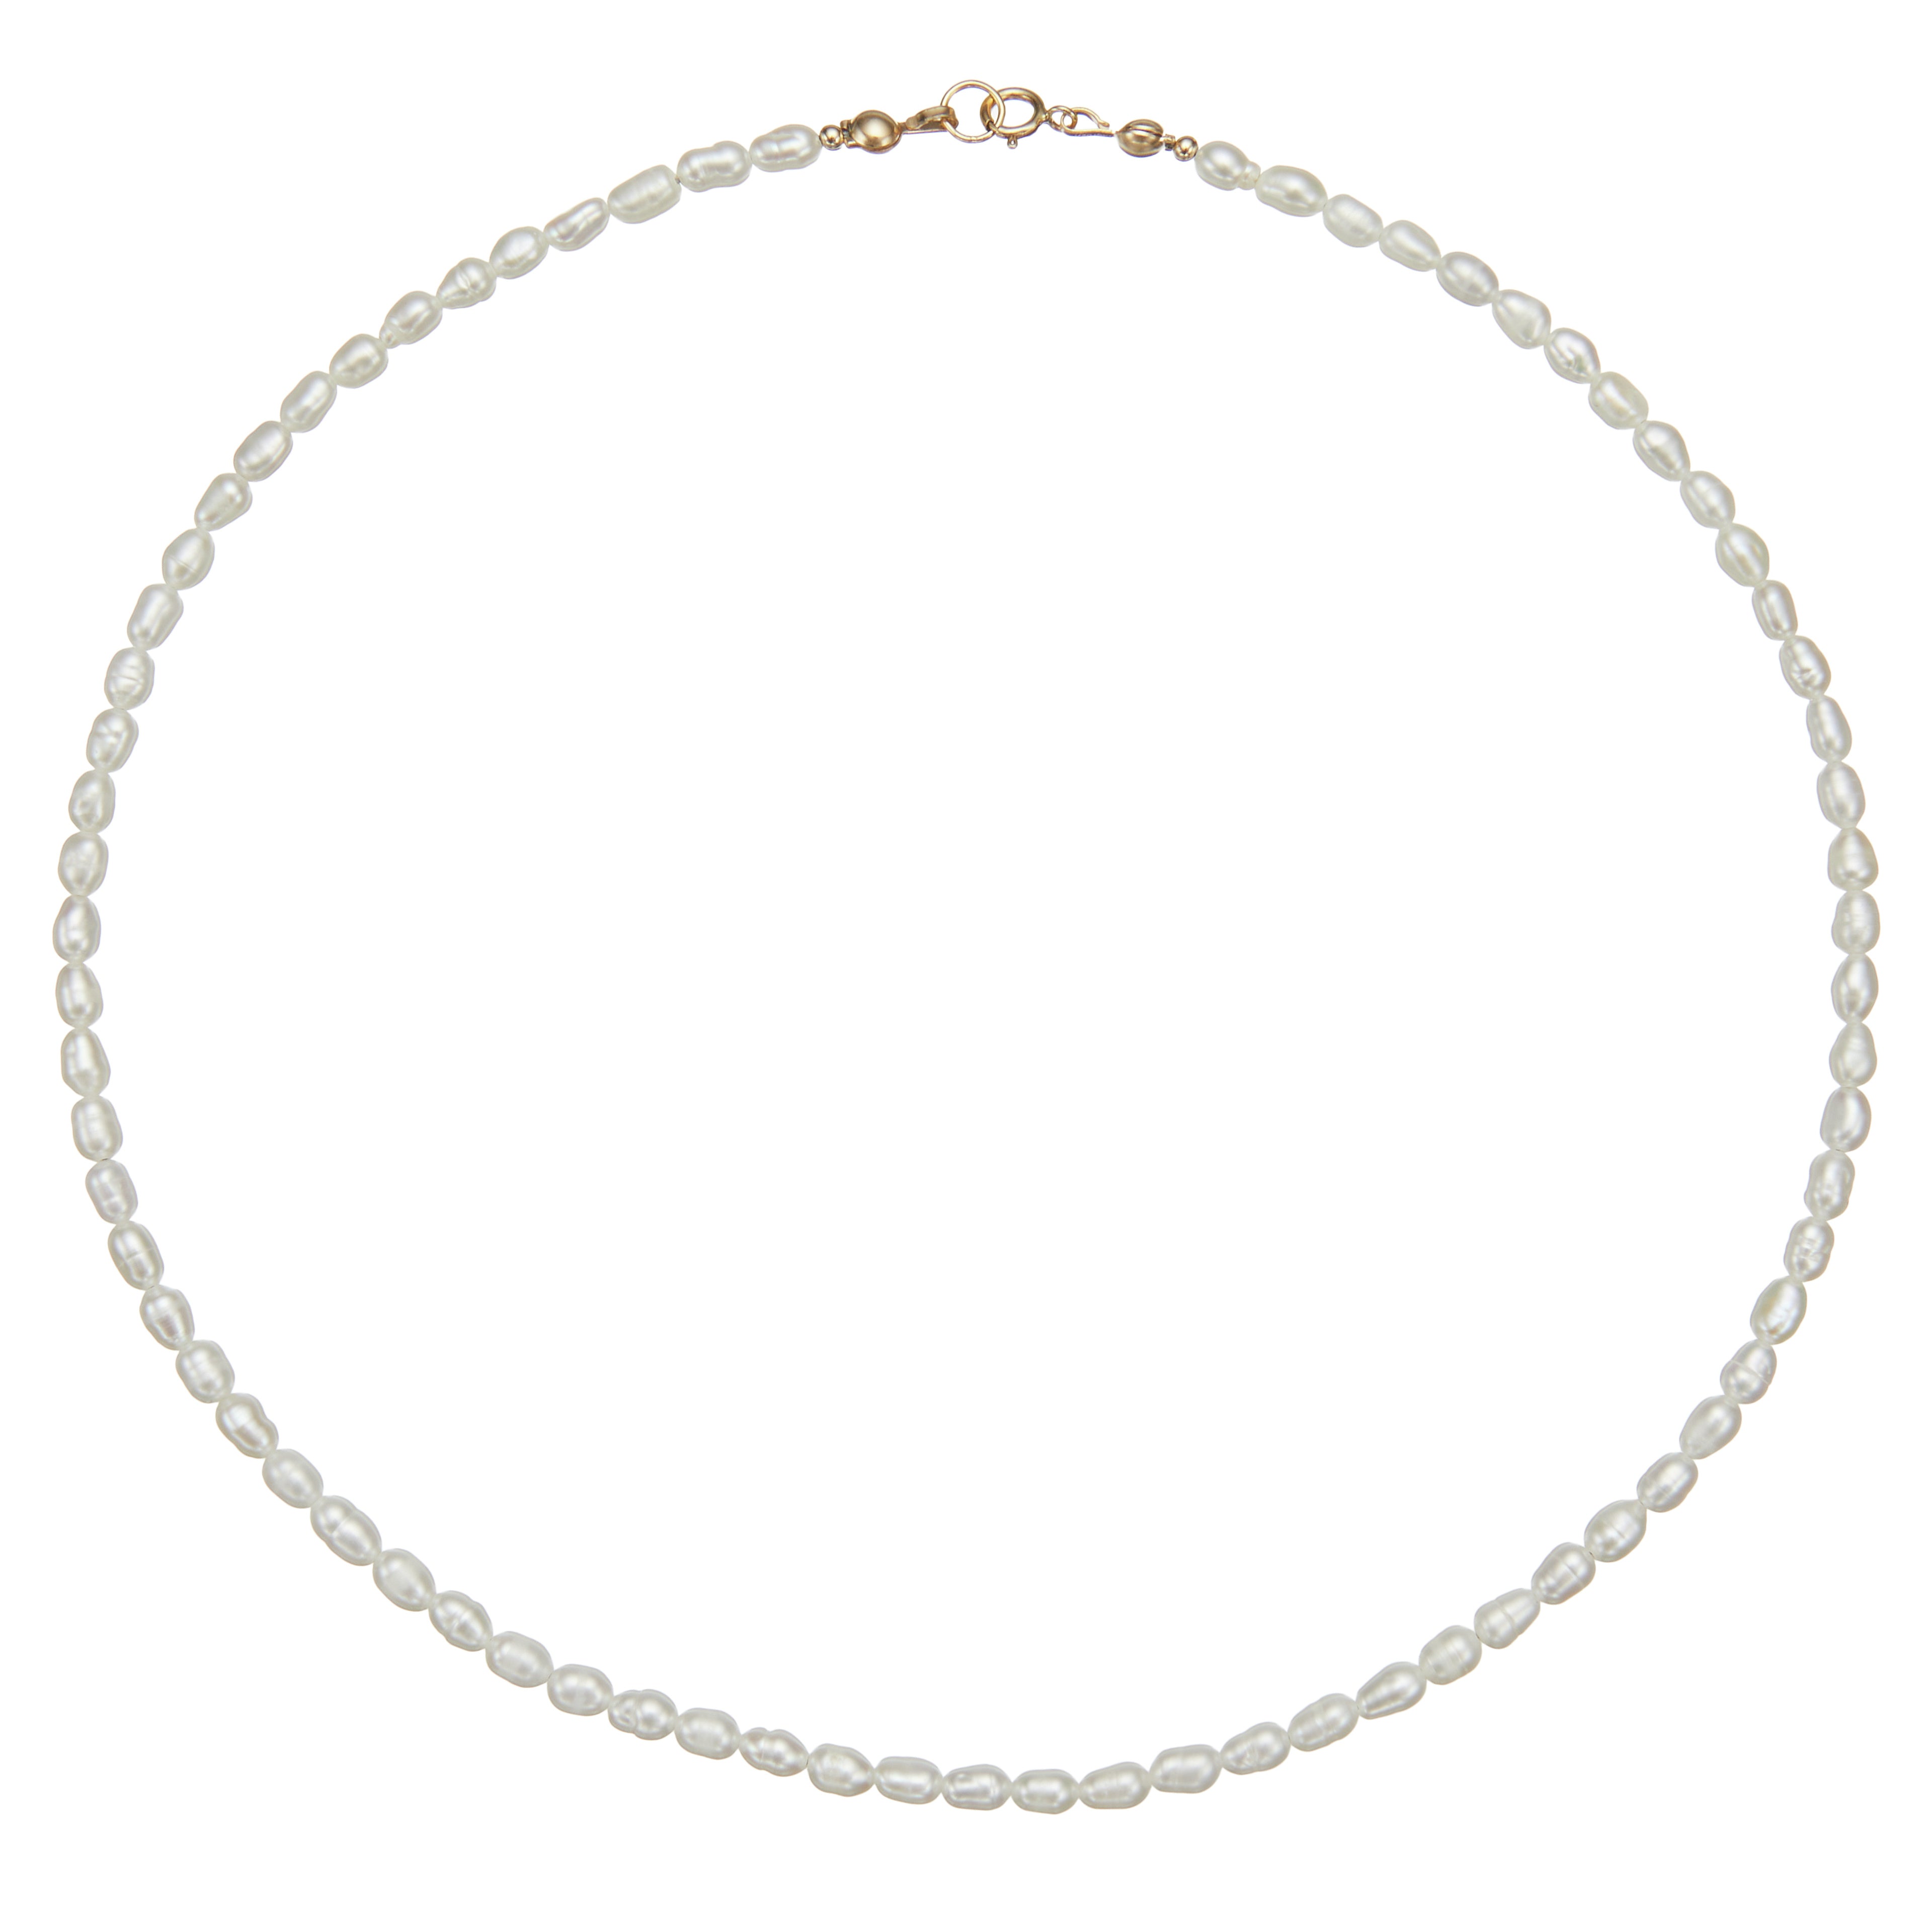 Gold seed pearl choker on a white background